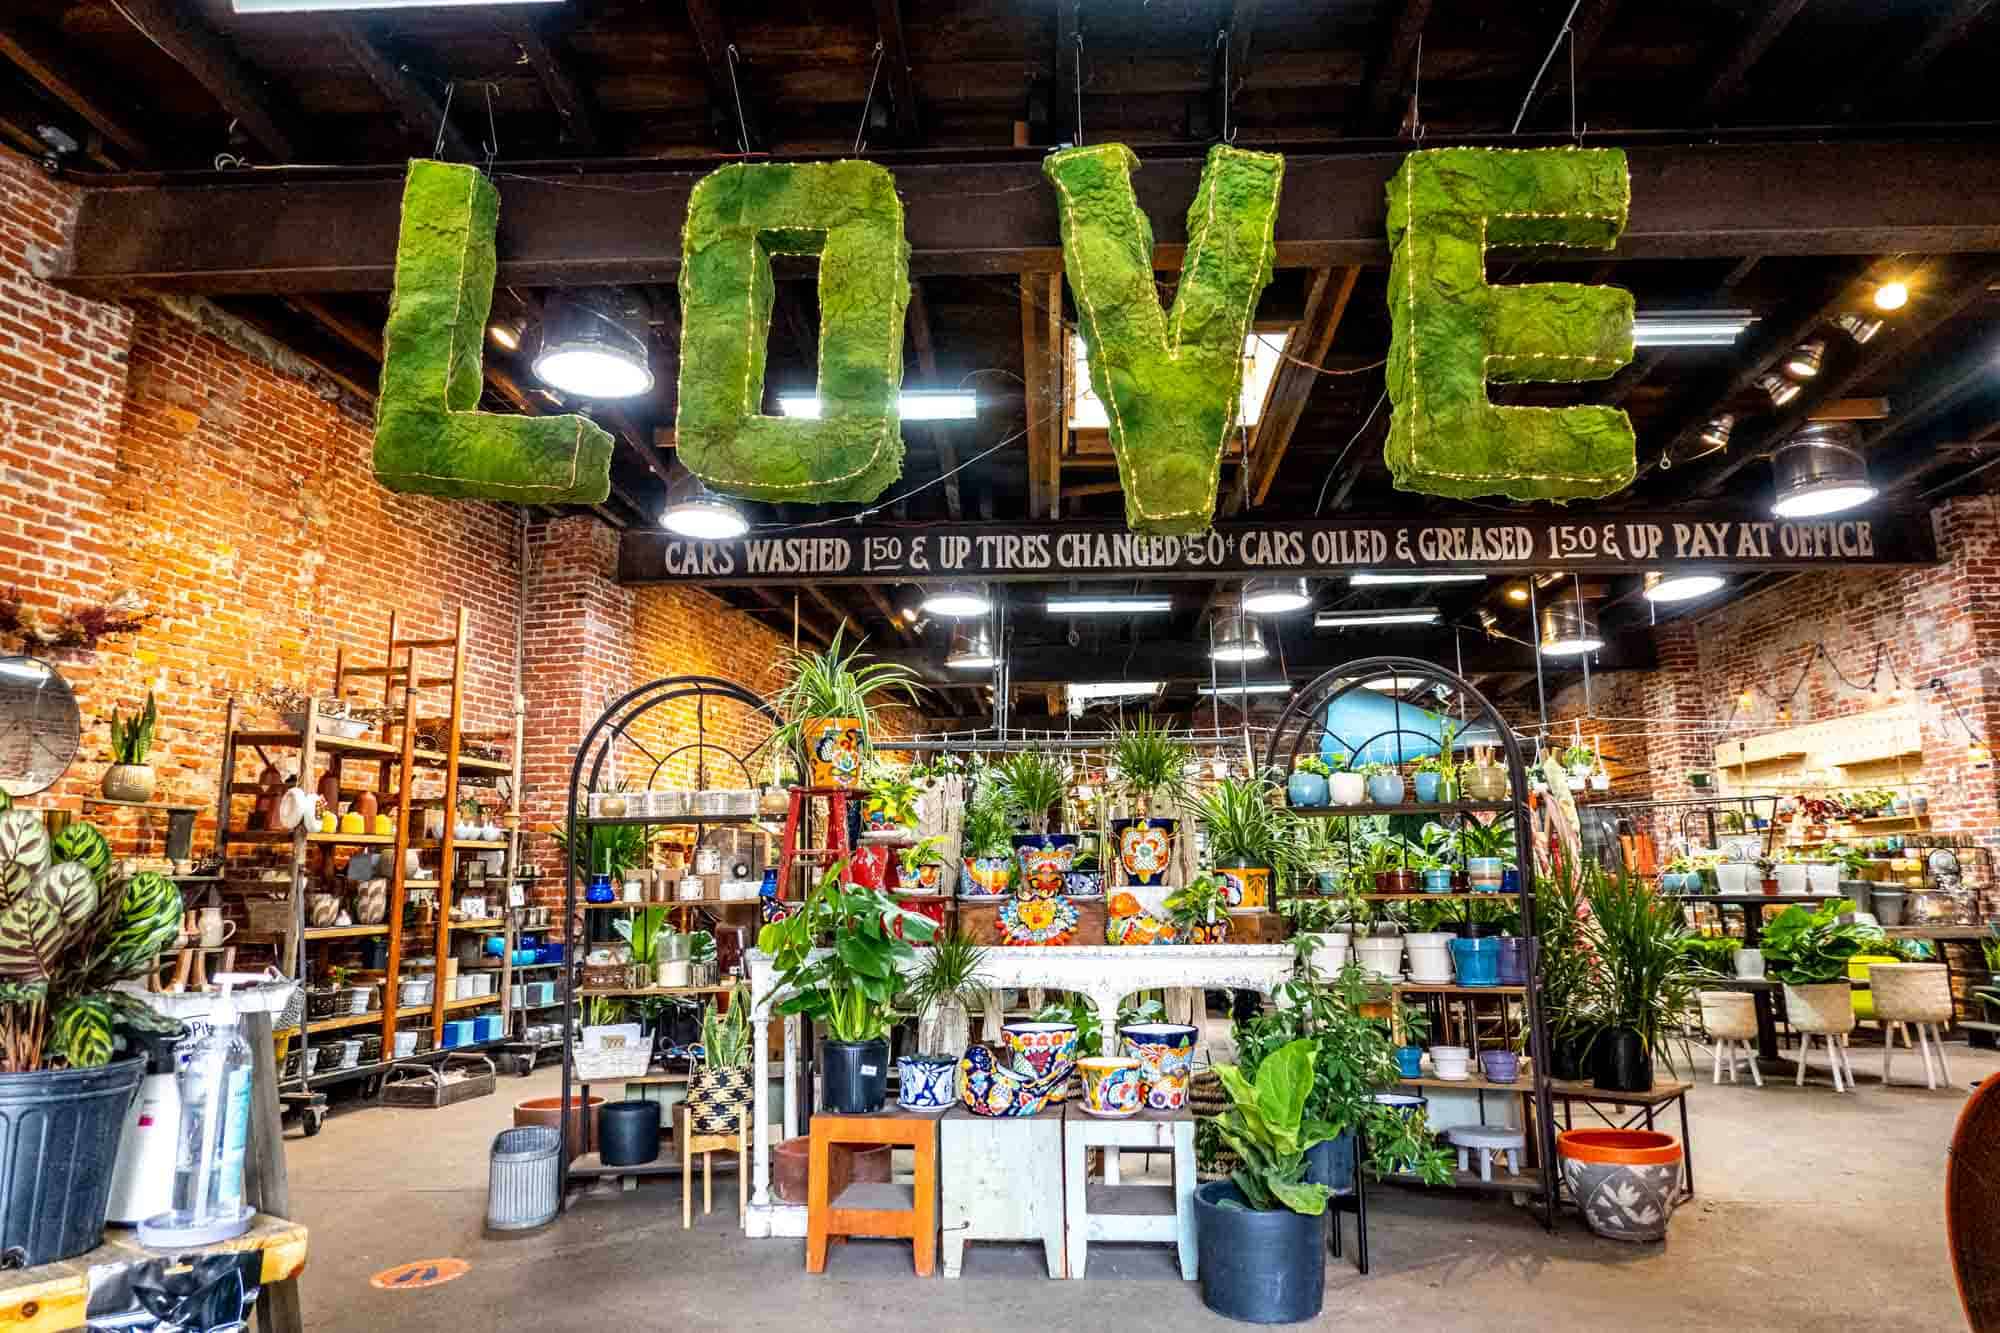 Store with lots of plants on display and green letters spelling "LOVE" hanging from the ceiling